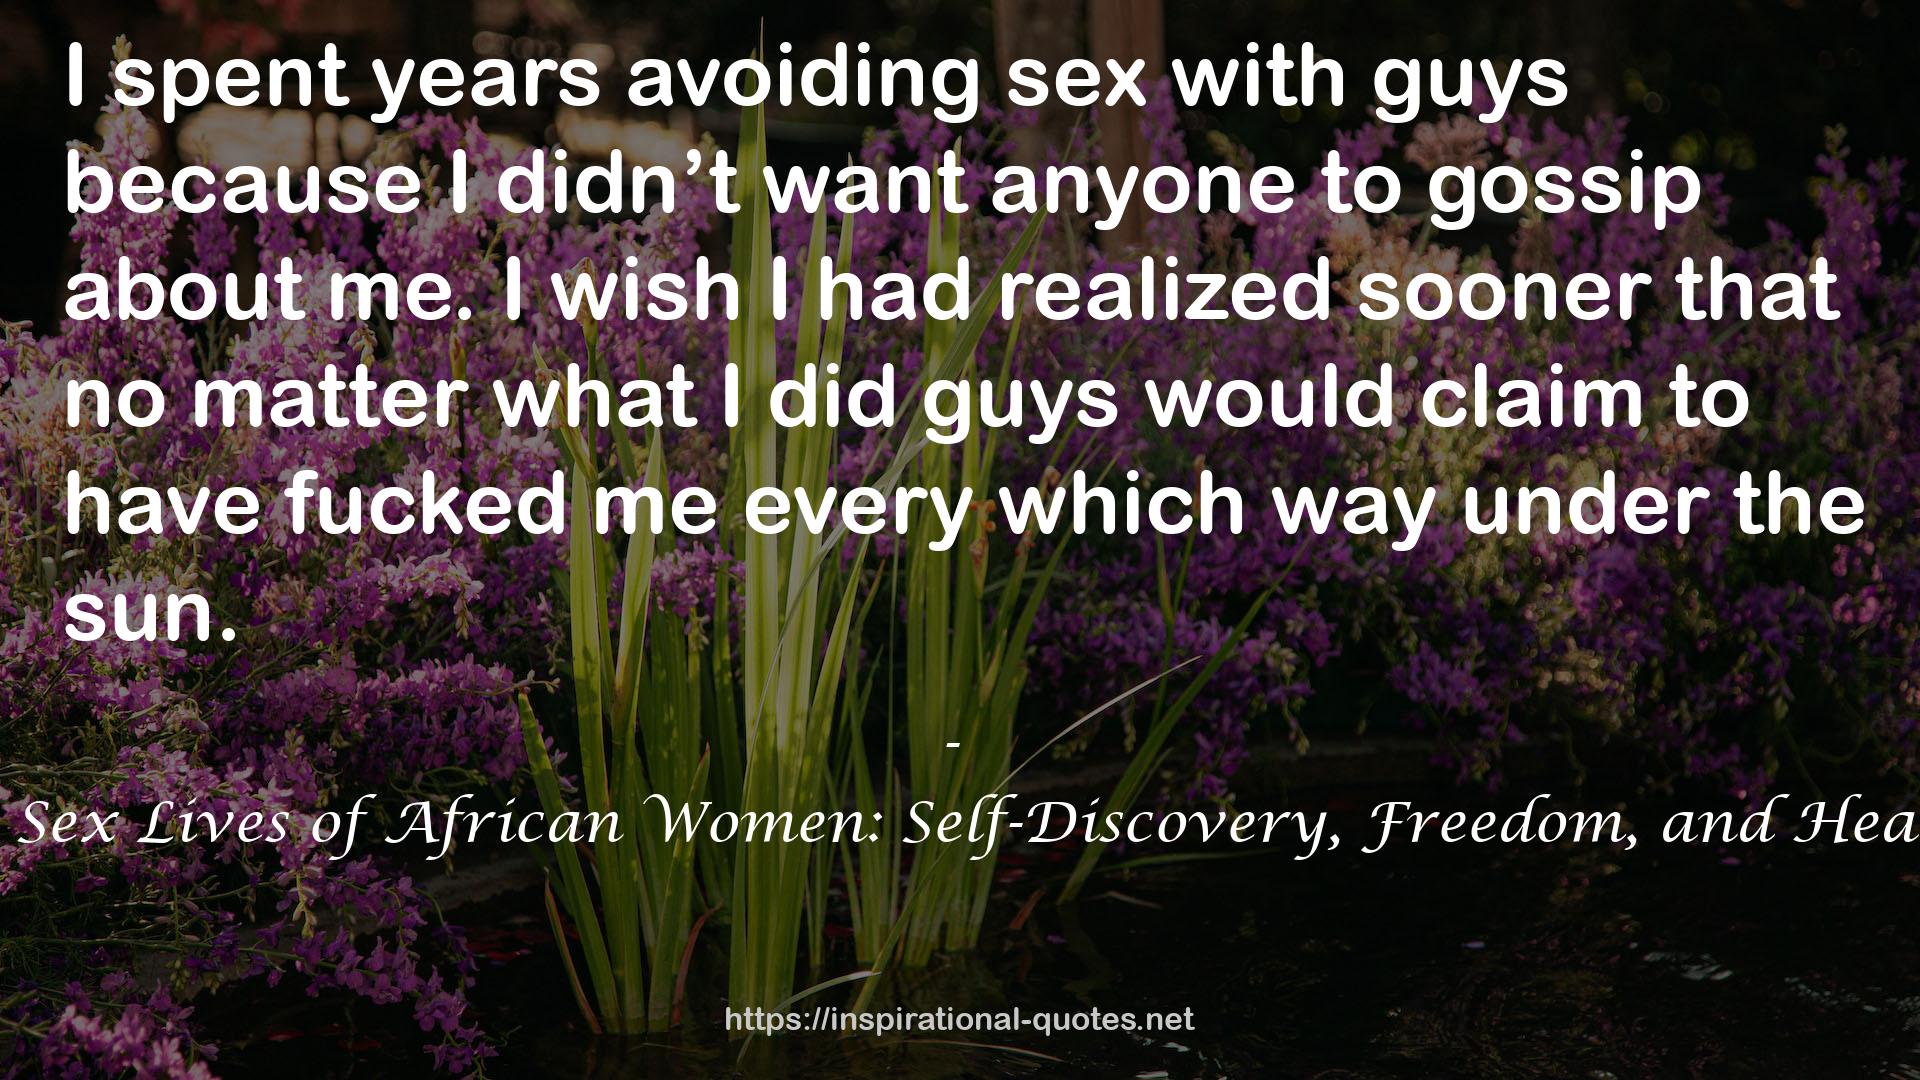 The Sex Lives of African Women: Self-Discovery, Freedom, and Healing QUOTES